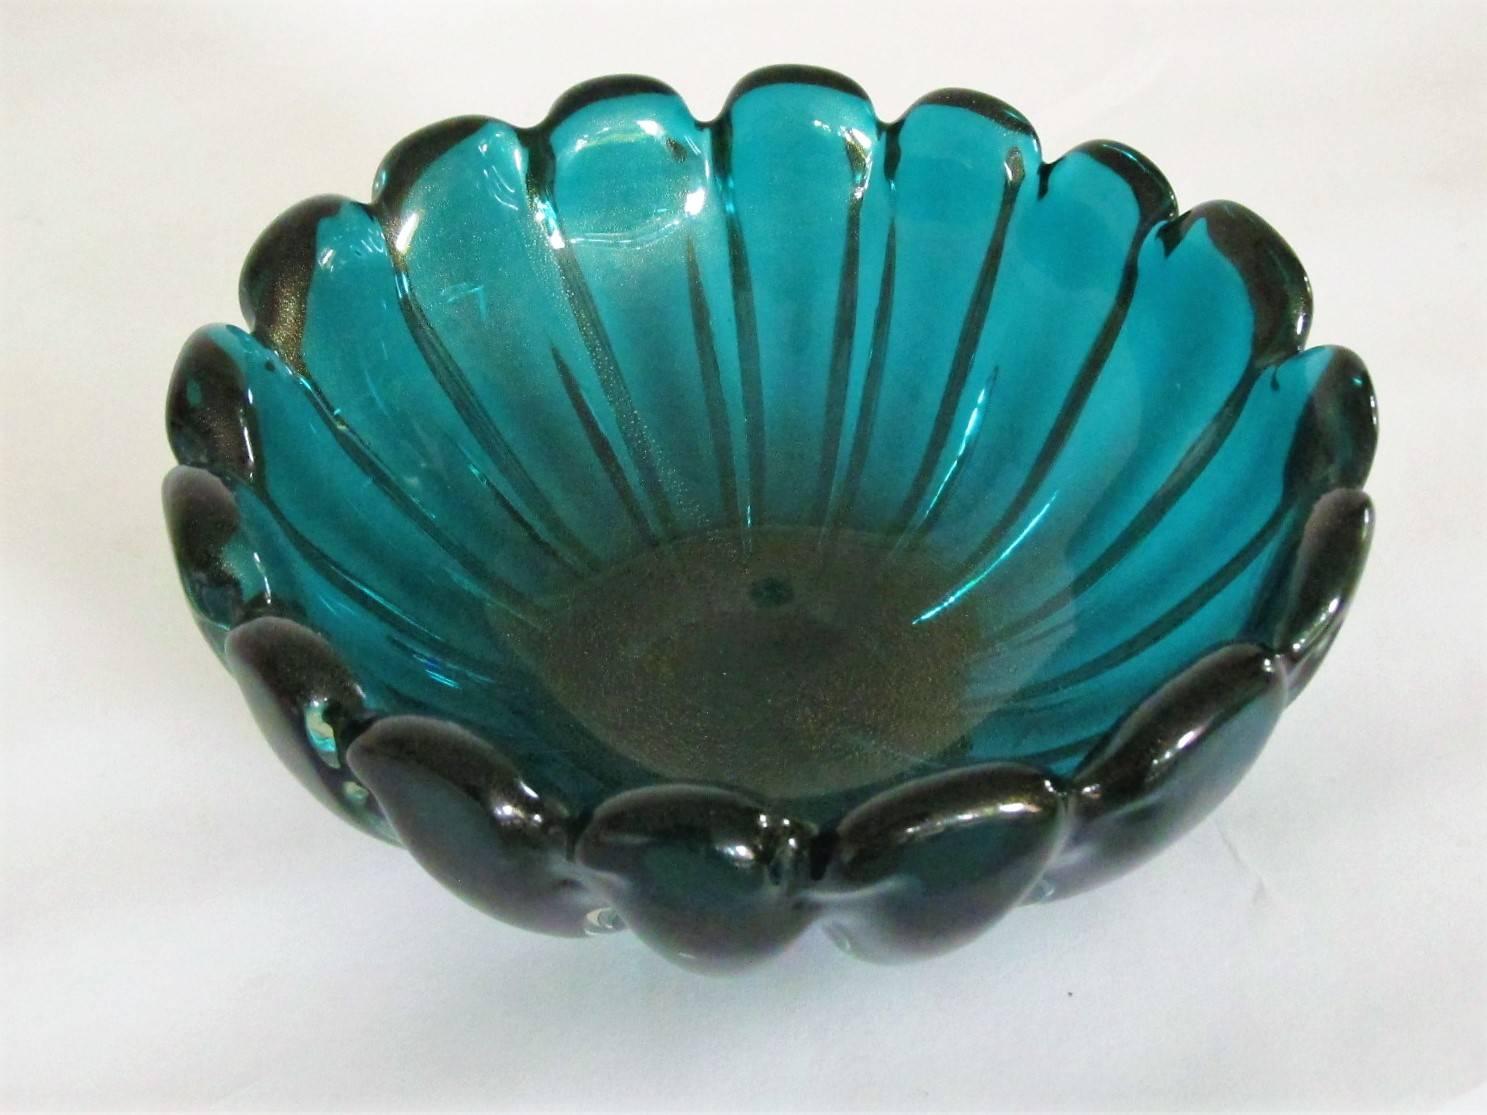 The form and the flow of this bowl are beautiful. But the color is stunning. Rare aquamarine with a galaxy of gold flake running through the interior. Minor damage and roughness to the bottom, but unnoticeable in normal usage.